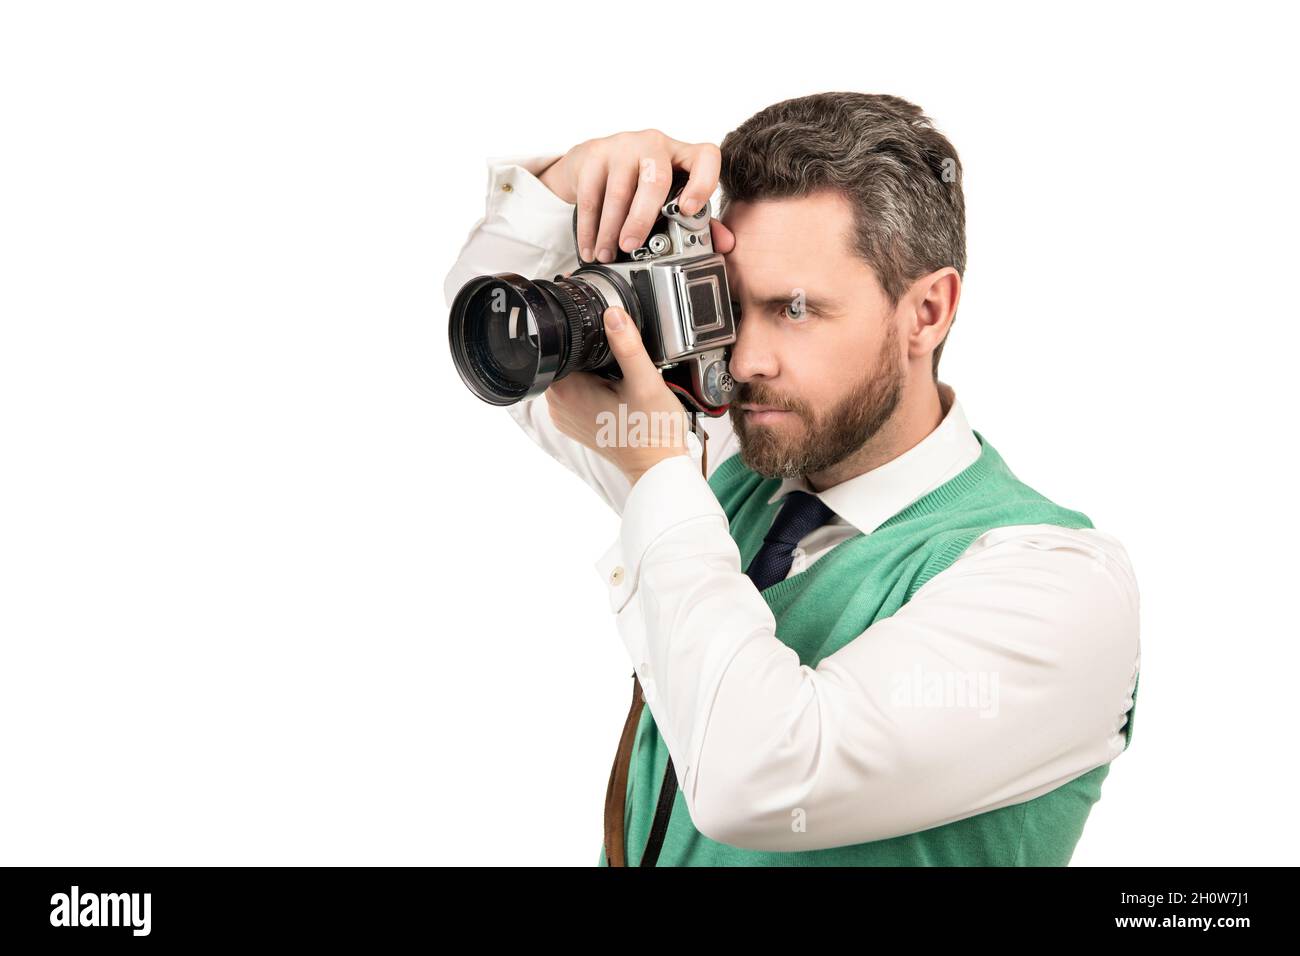 male photographer. copy space. man photographing. guy holding photo camera. Stock Photo